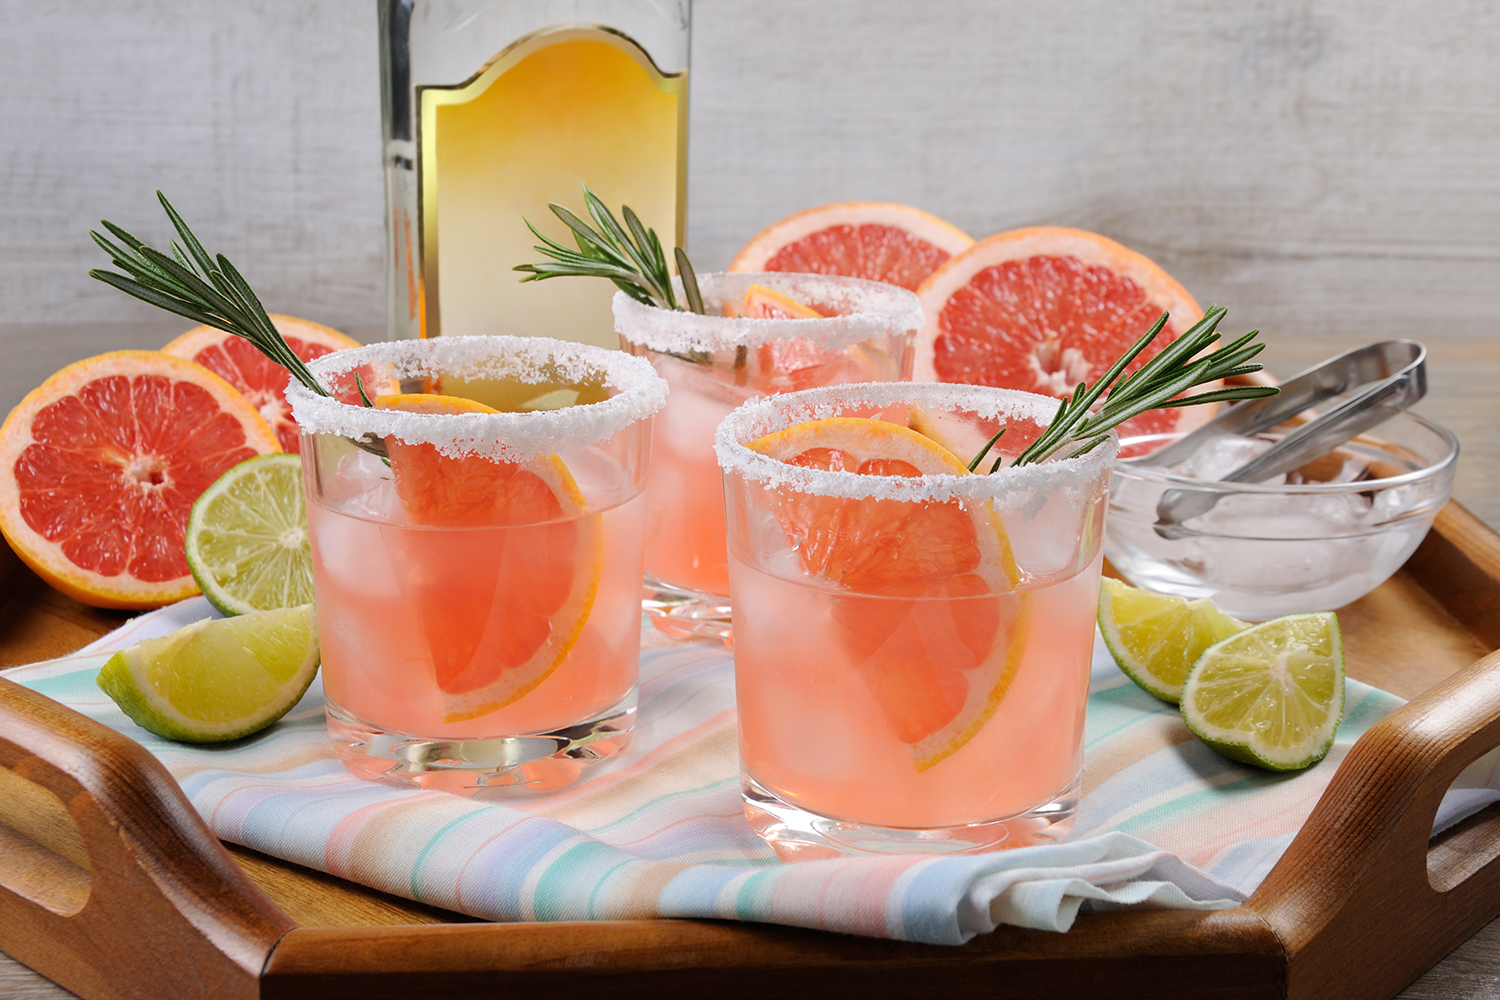 https://www.themanual.com/wp-content/uploads/sites/9/2021/06/paloma-cocktail-tequila-drink-grapefruit-lime.jpg?fit=800%2C800&p=1